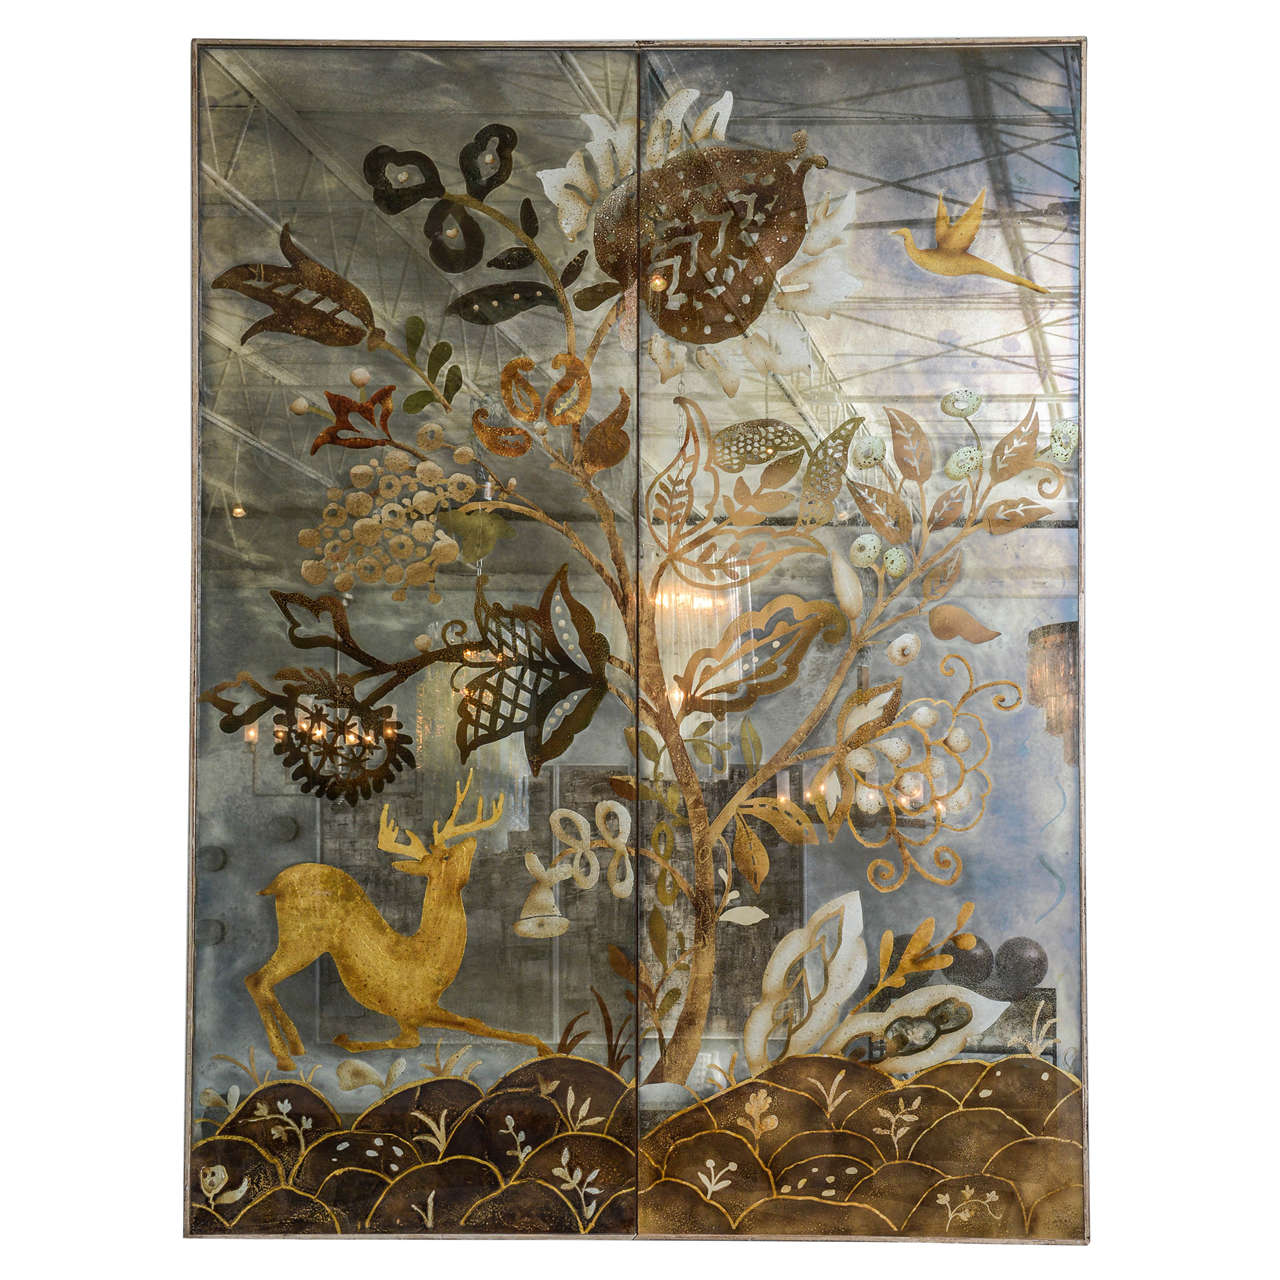 A Monumental Art Deco Eglomise Panel, France, style of Dunand